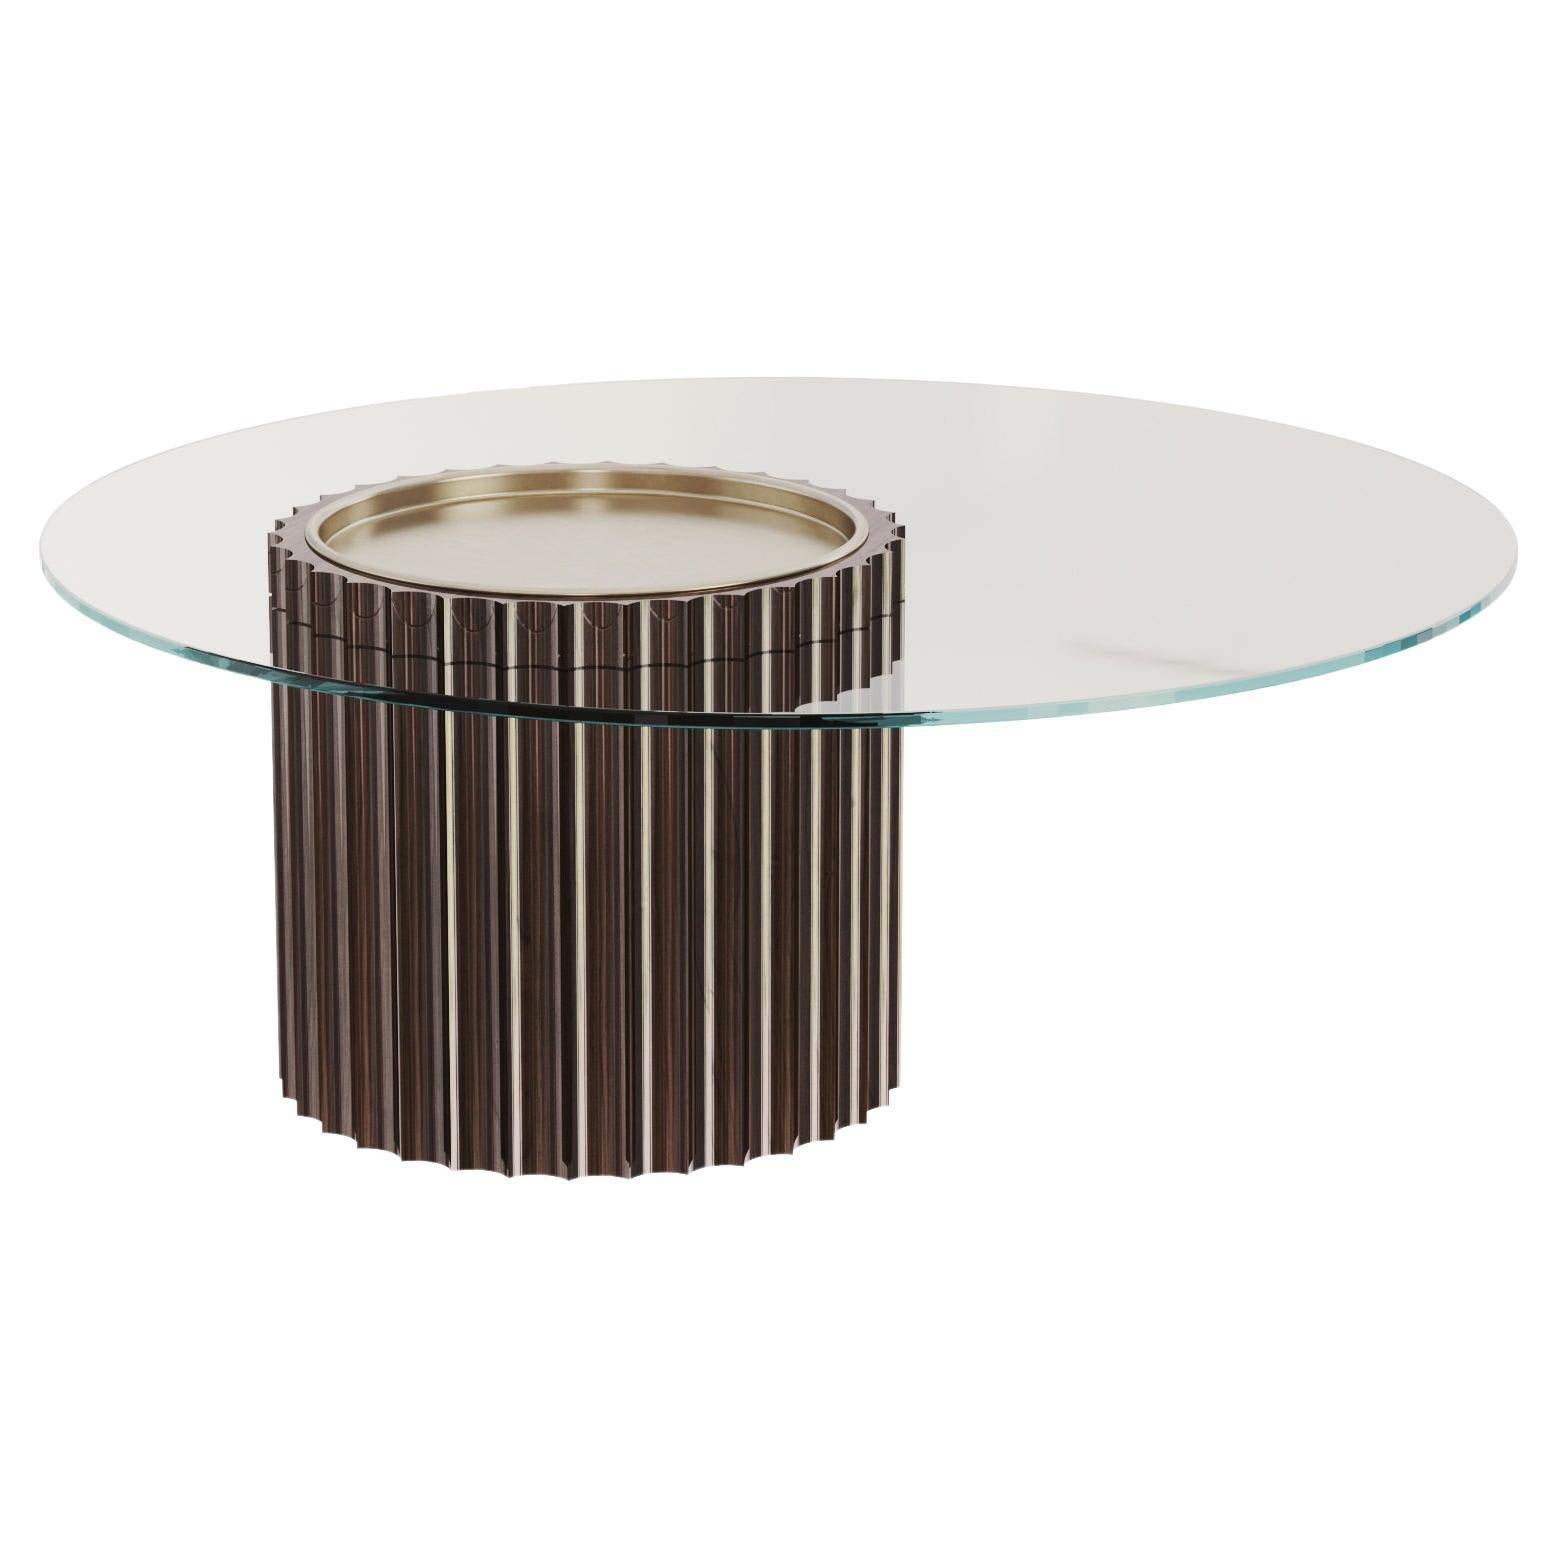 Modern Art Deco Side Table in Lacquered Dark Wood with Glass Top Ø 100cm